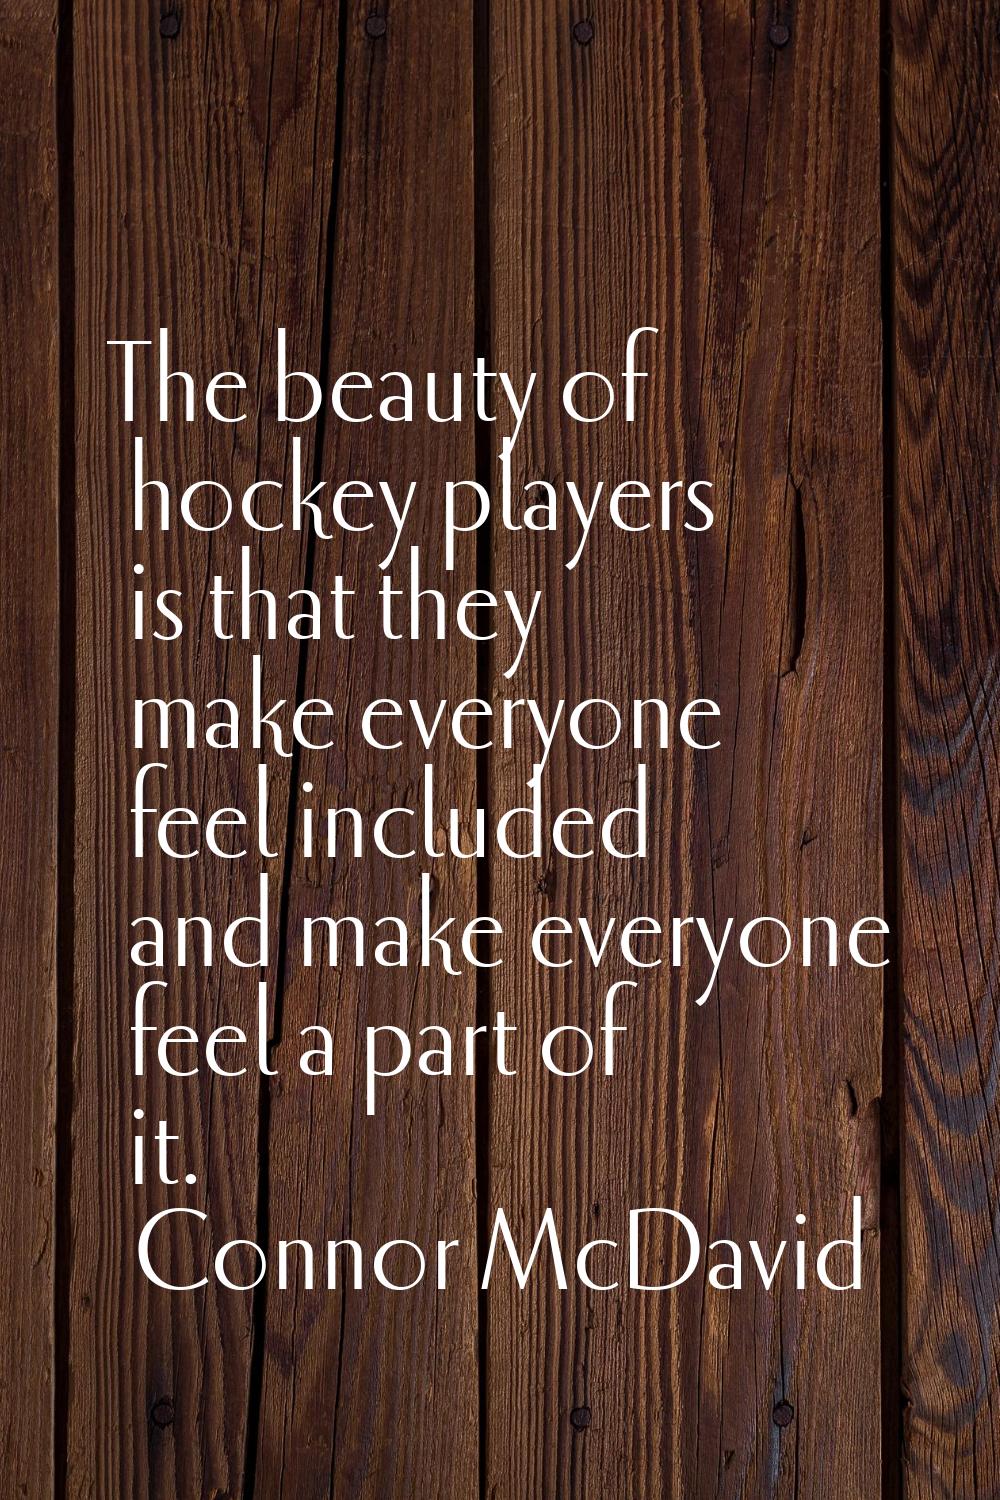 The beauty of hockey players is that they make everyone feel included and make everyone feel a part